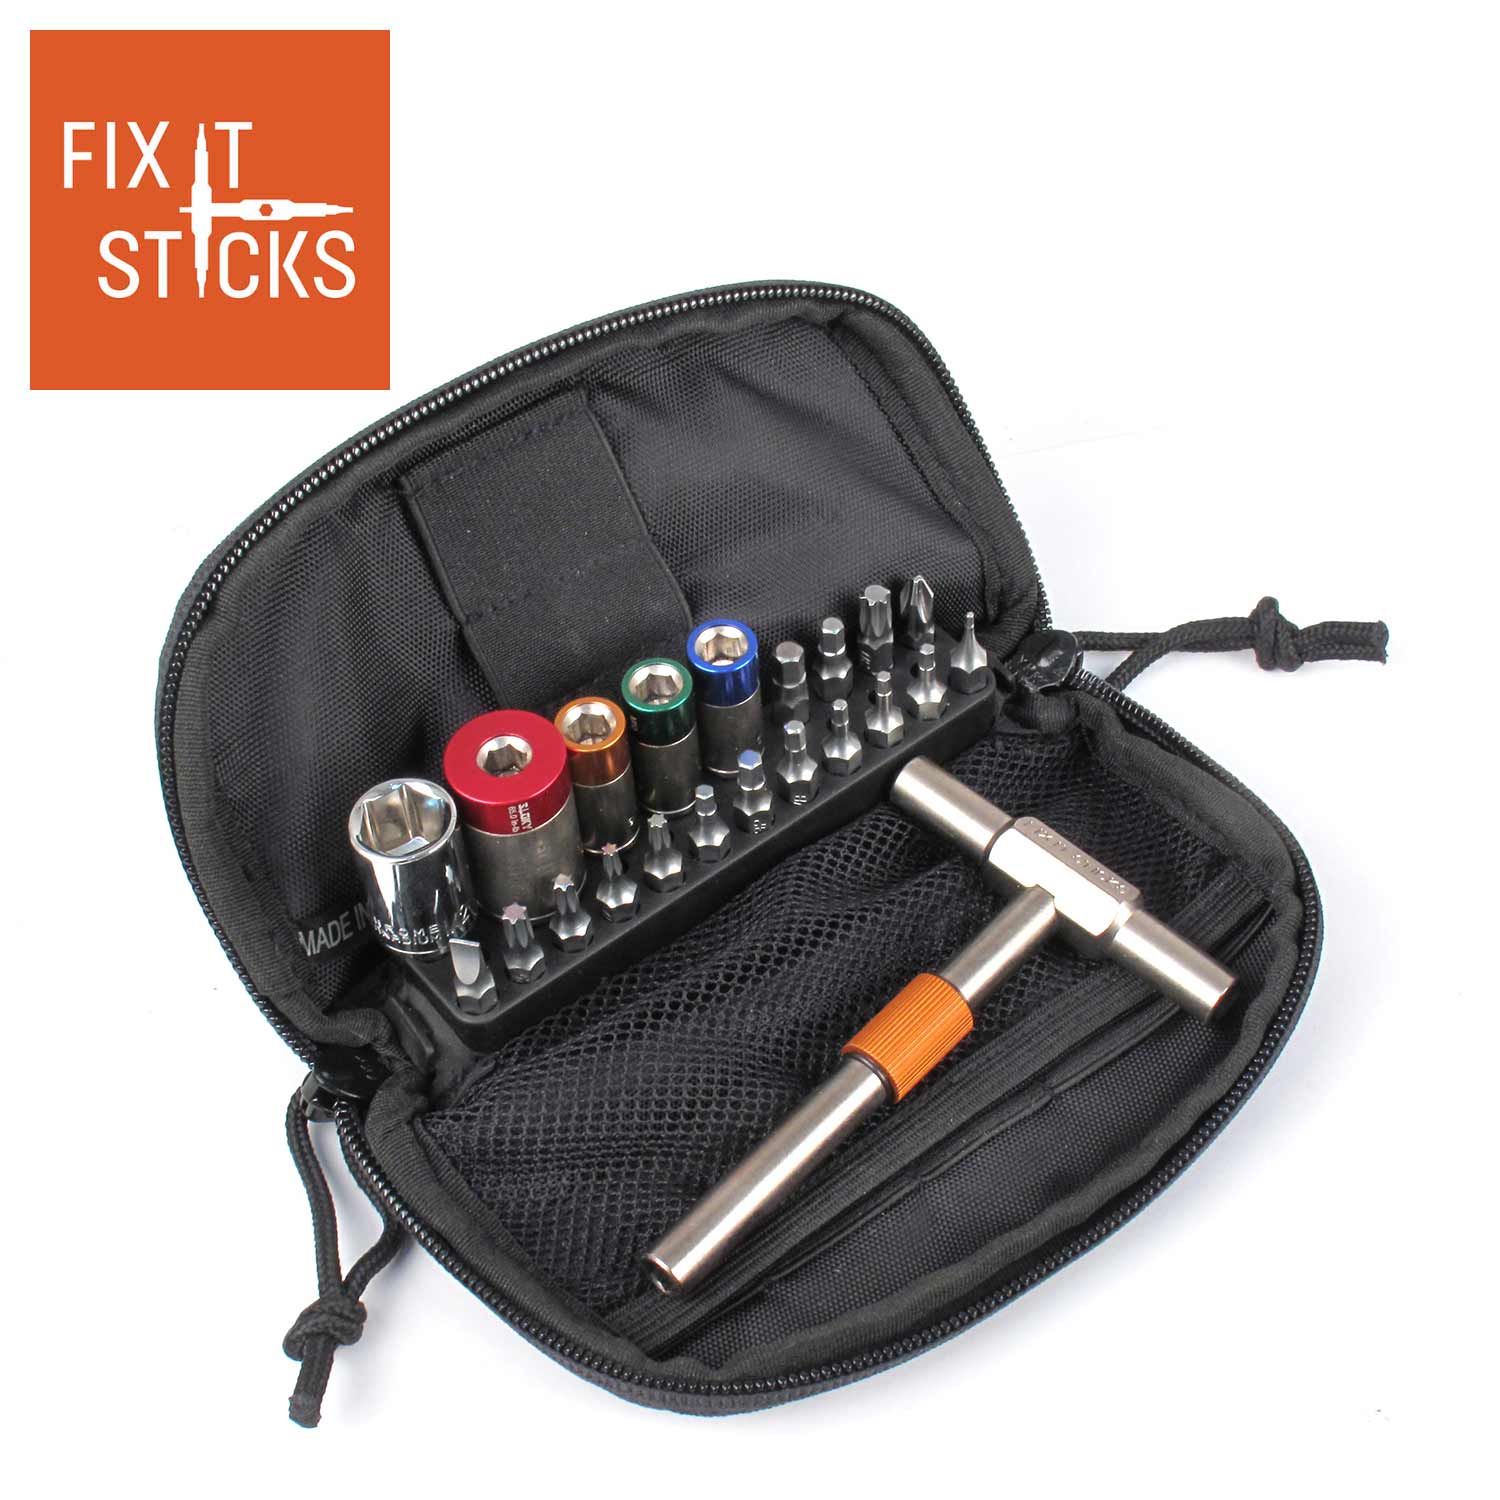 Tool Kit by ParaWire - quality tools, comfort grip handles, nifty